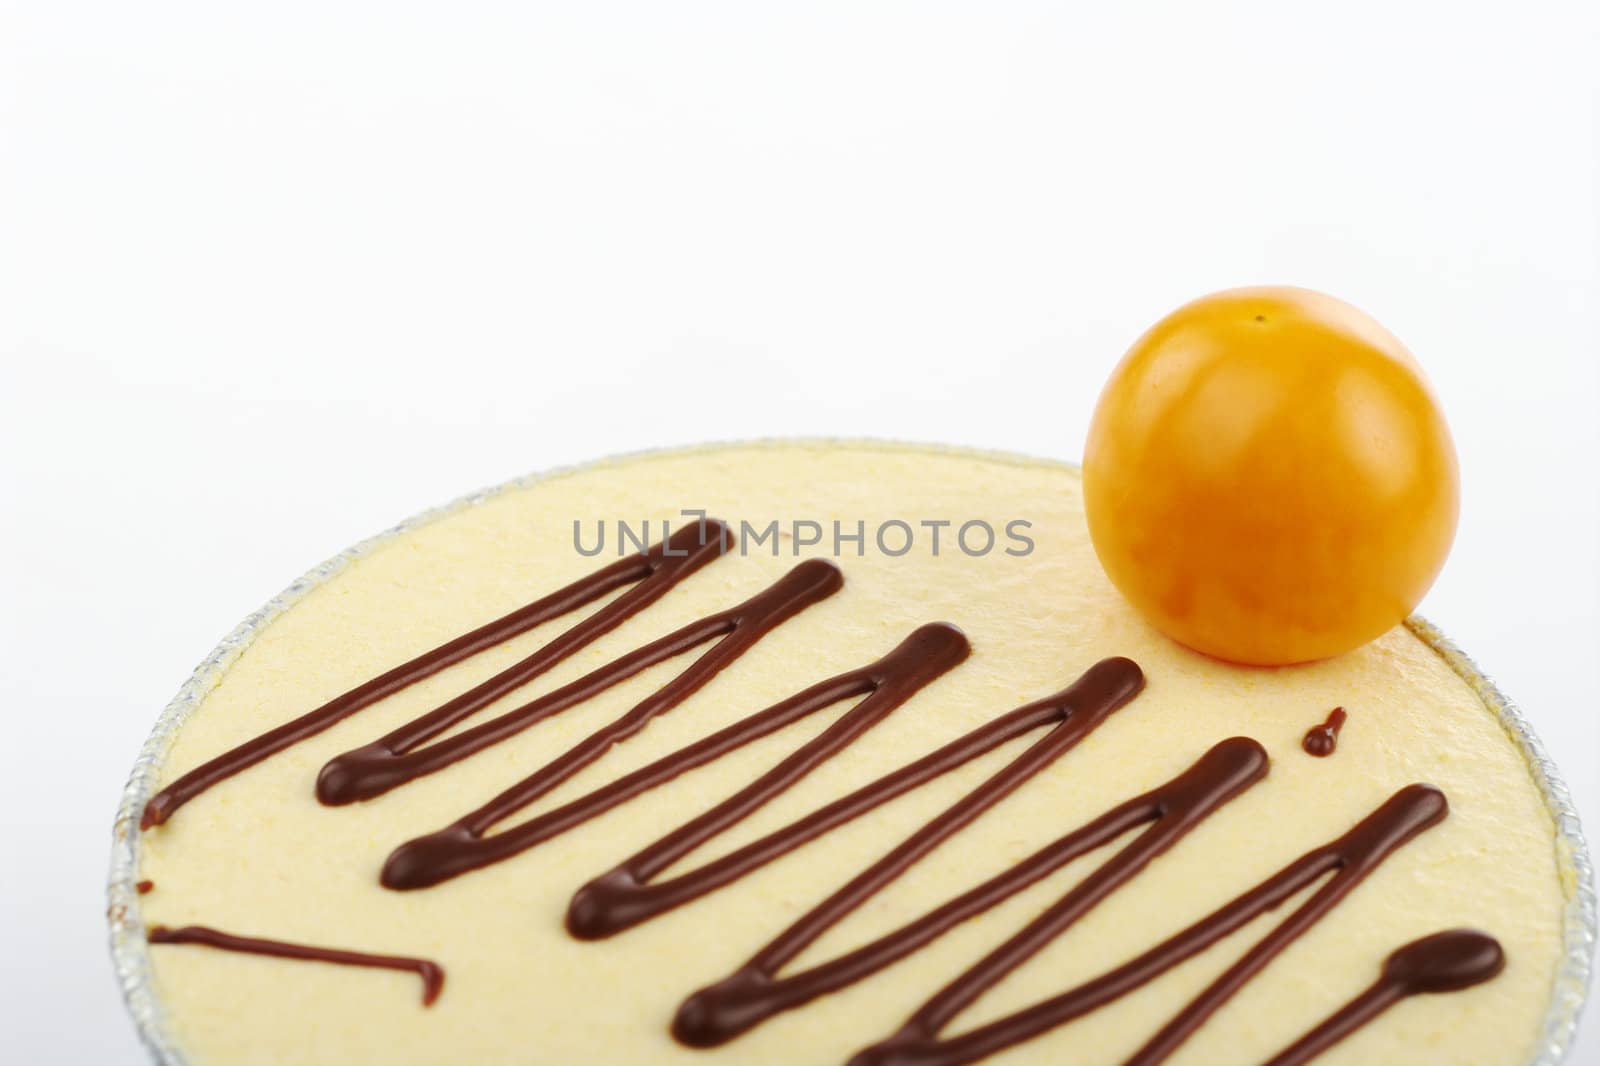 Small cake garnished with physalis berry (Selective Focus)